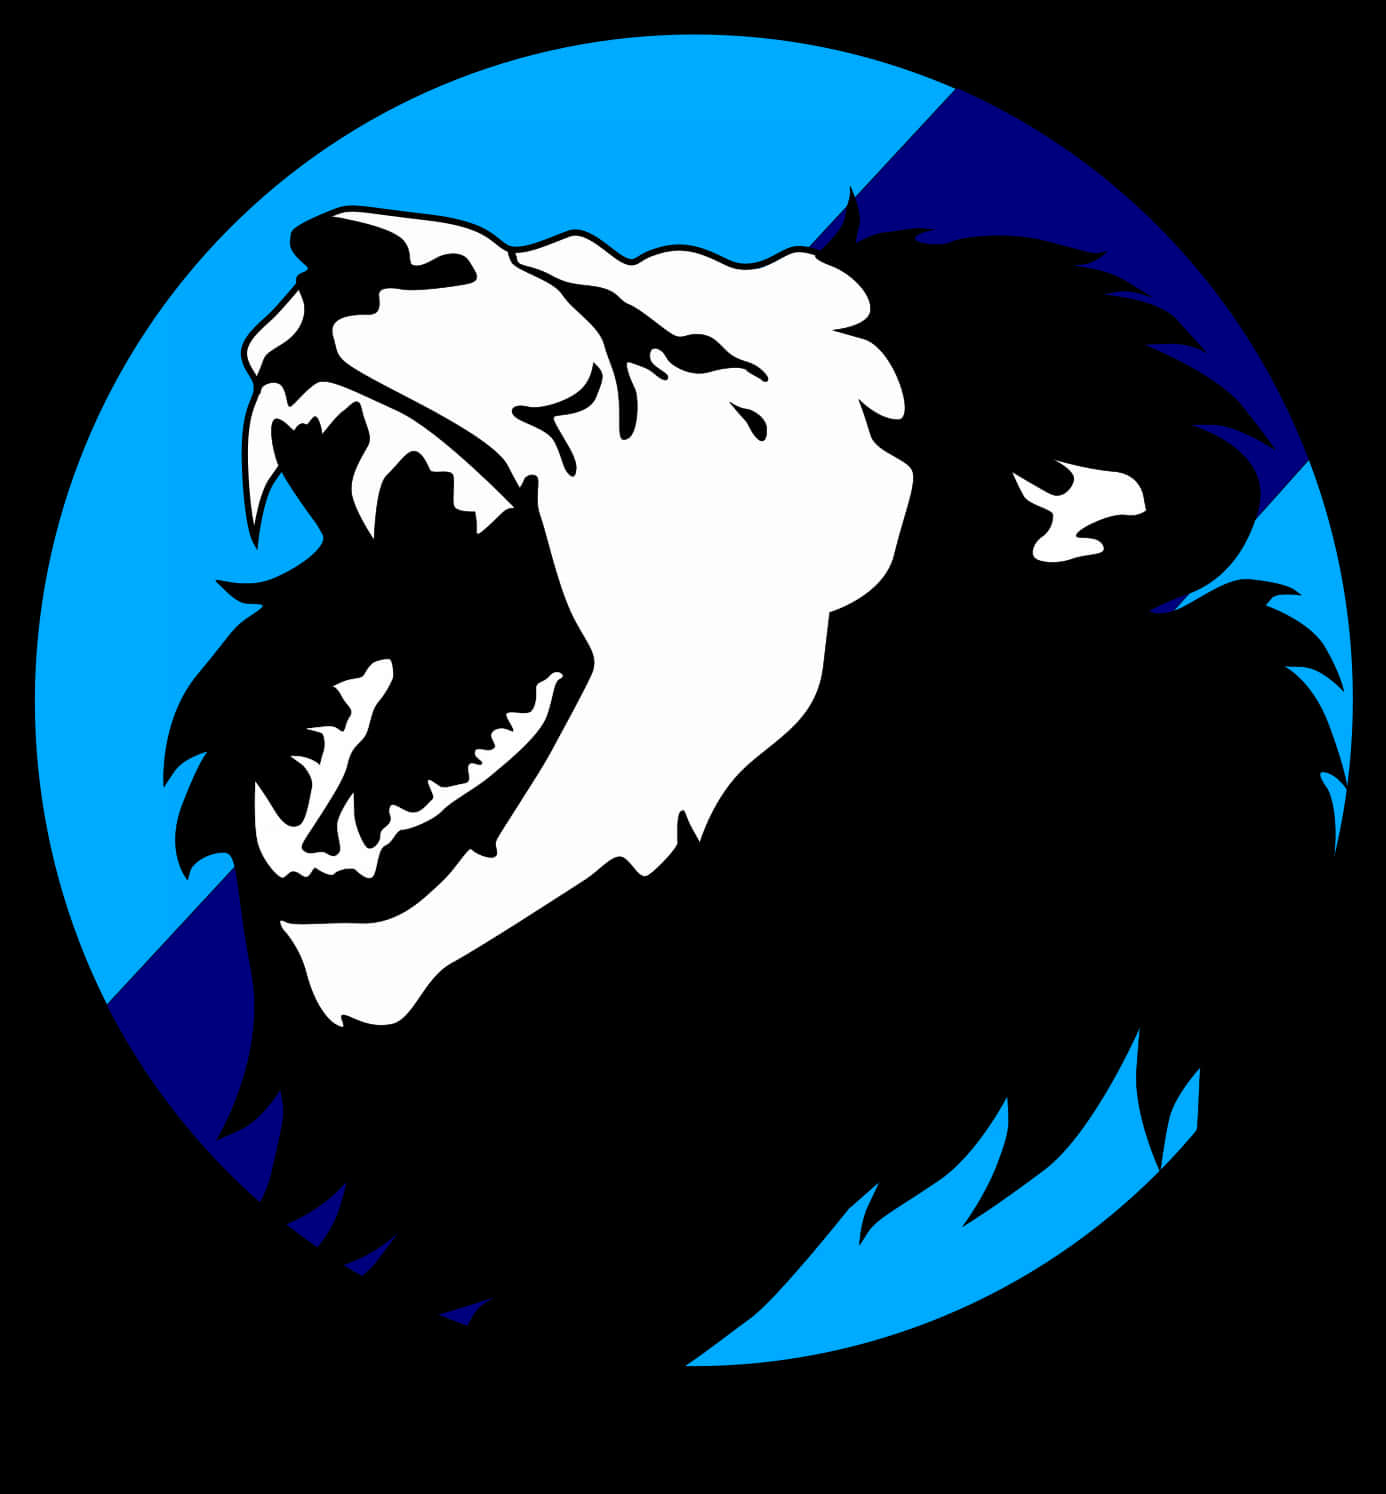 Roaring Lion Graphic PNG image